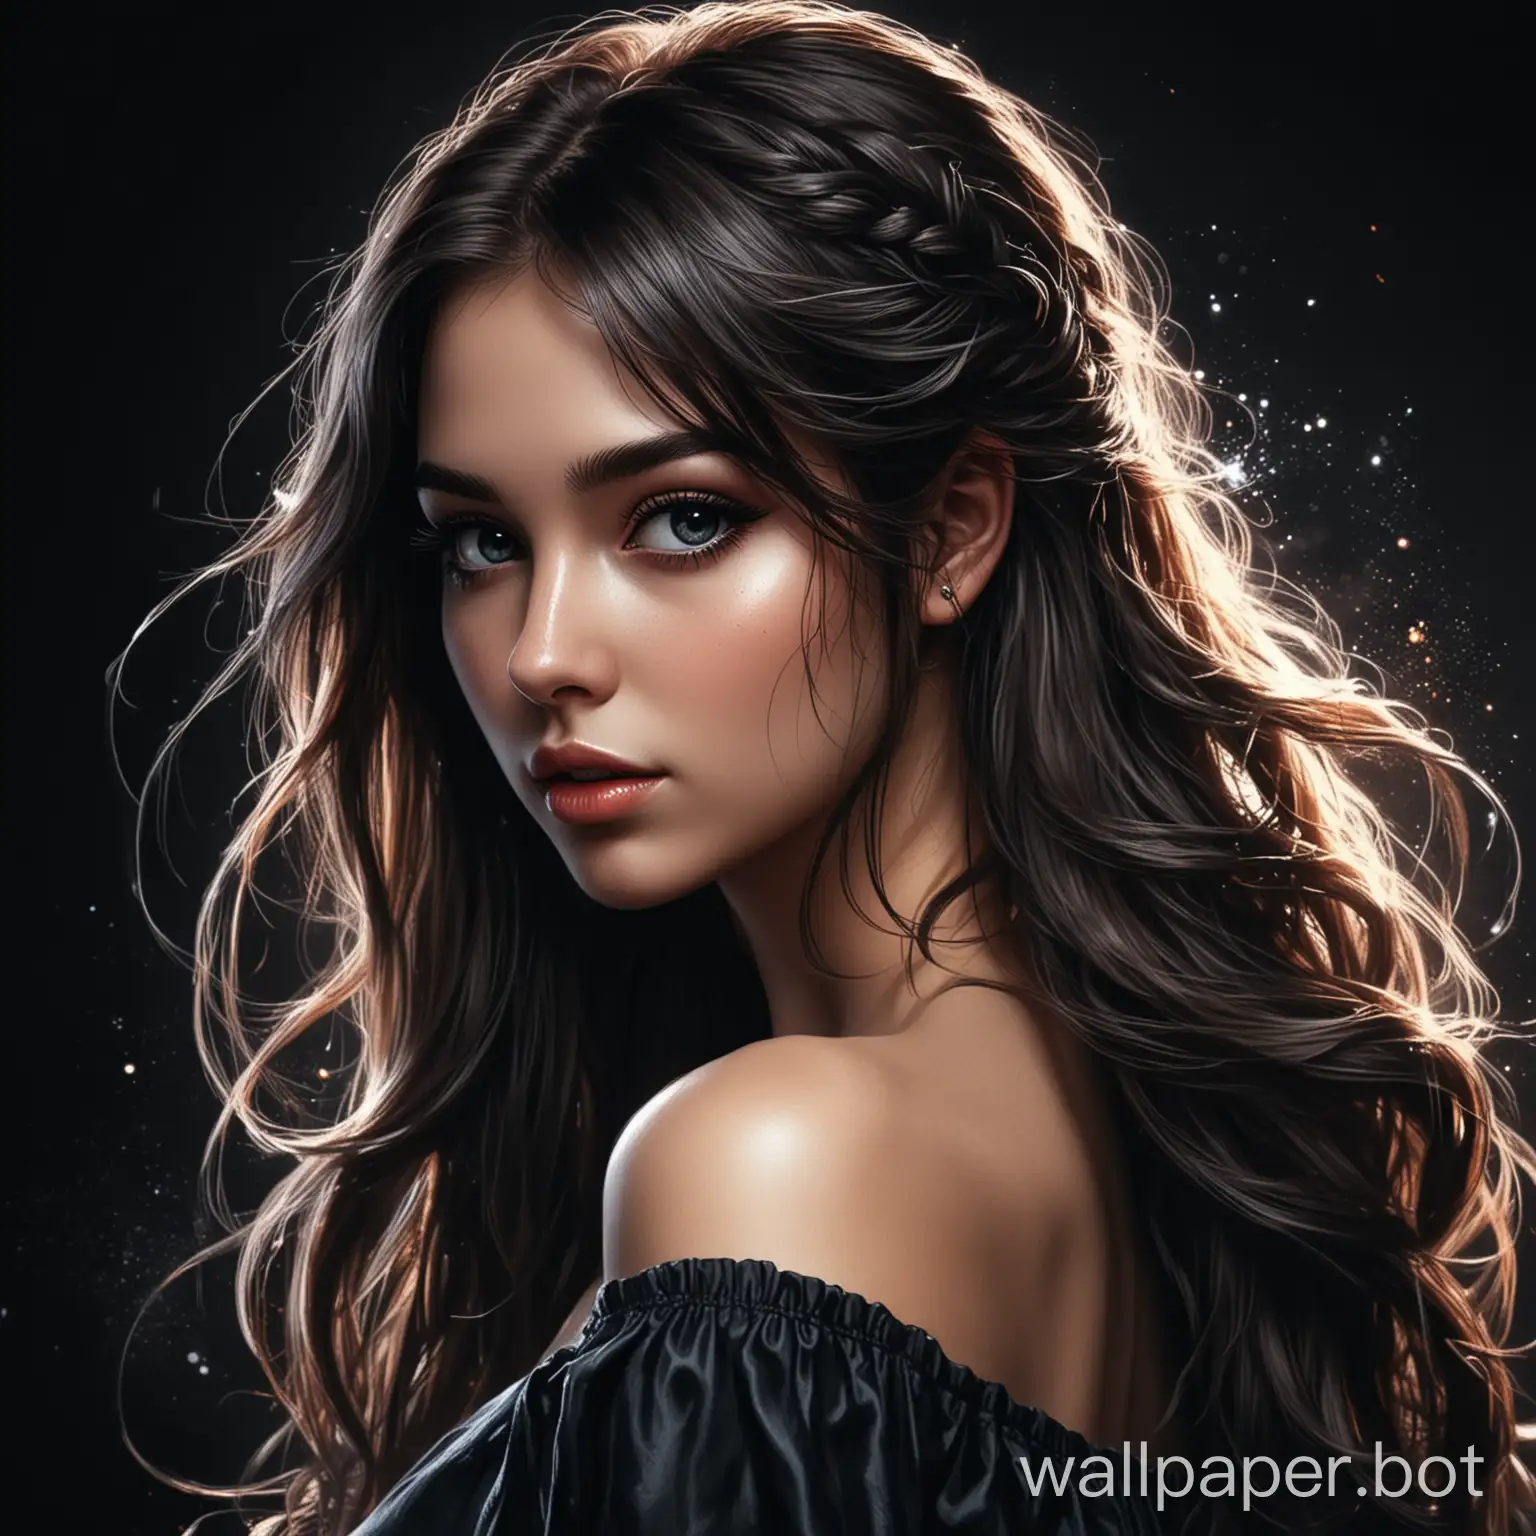 draw a fantasy beautiful girl on a black background